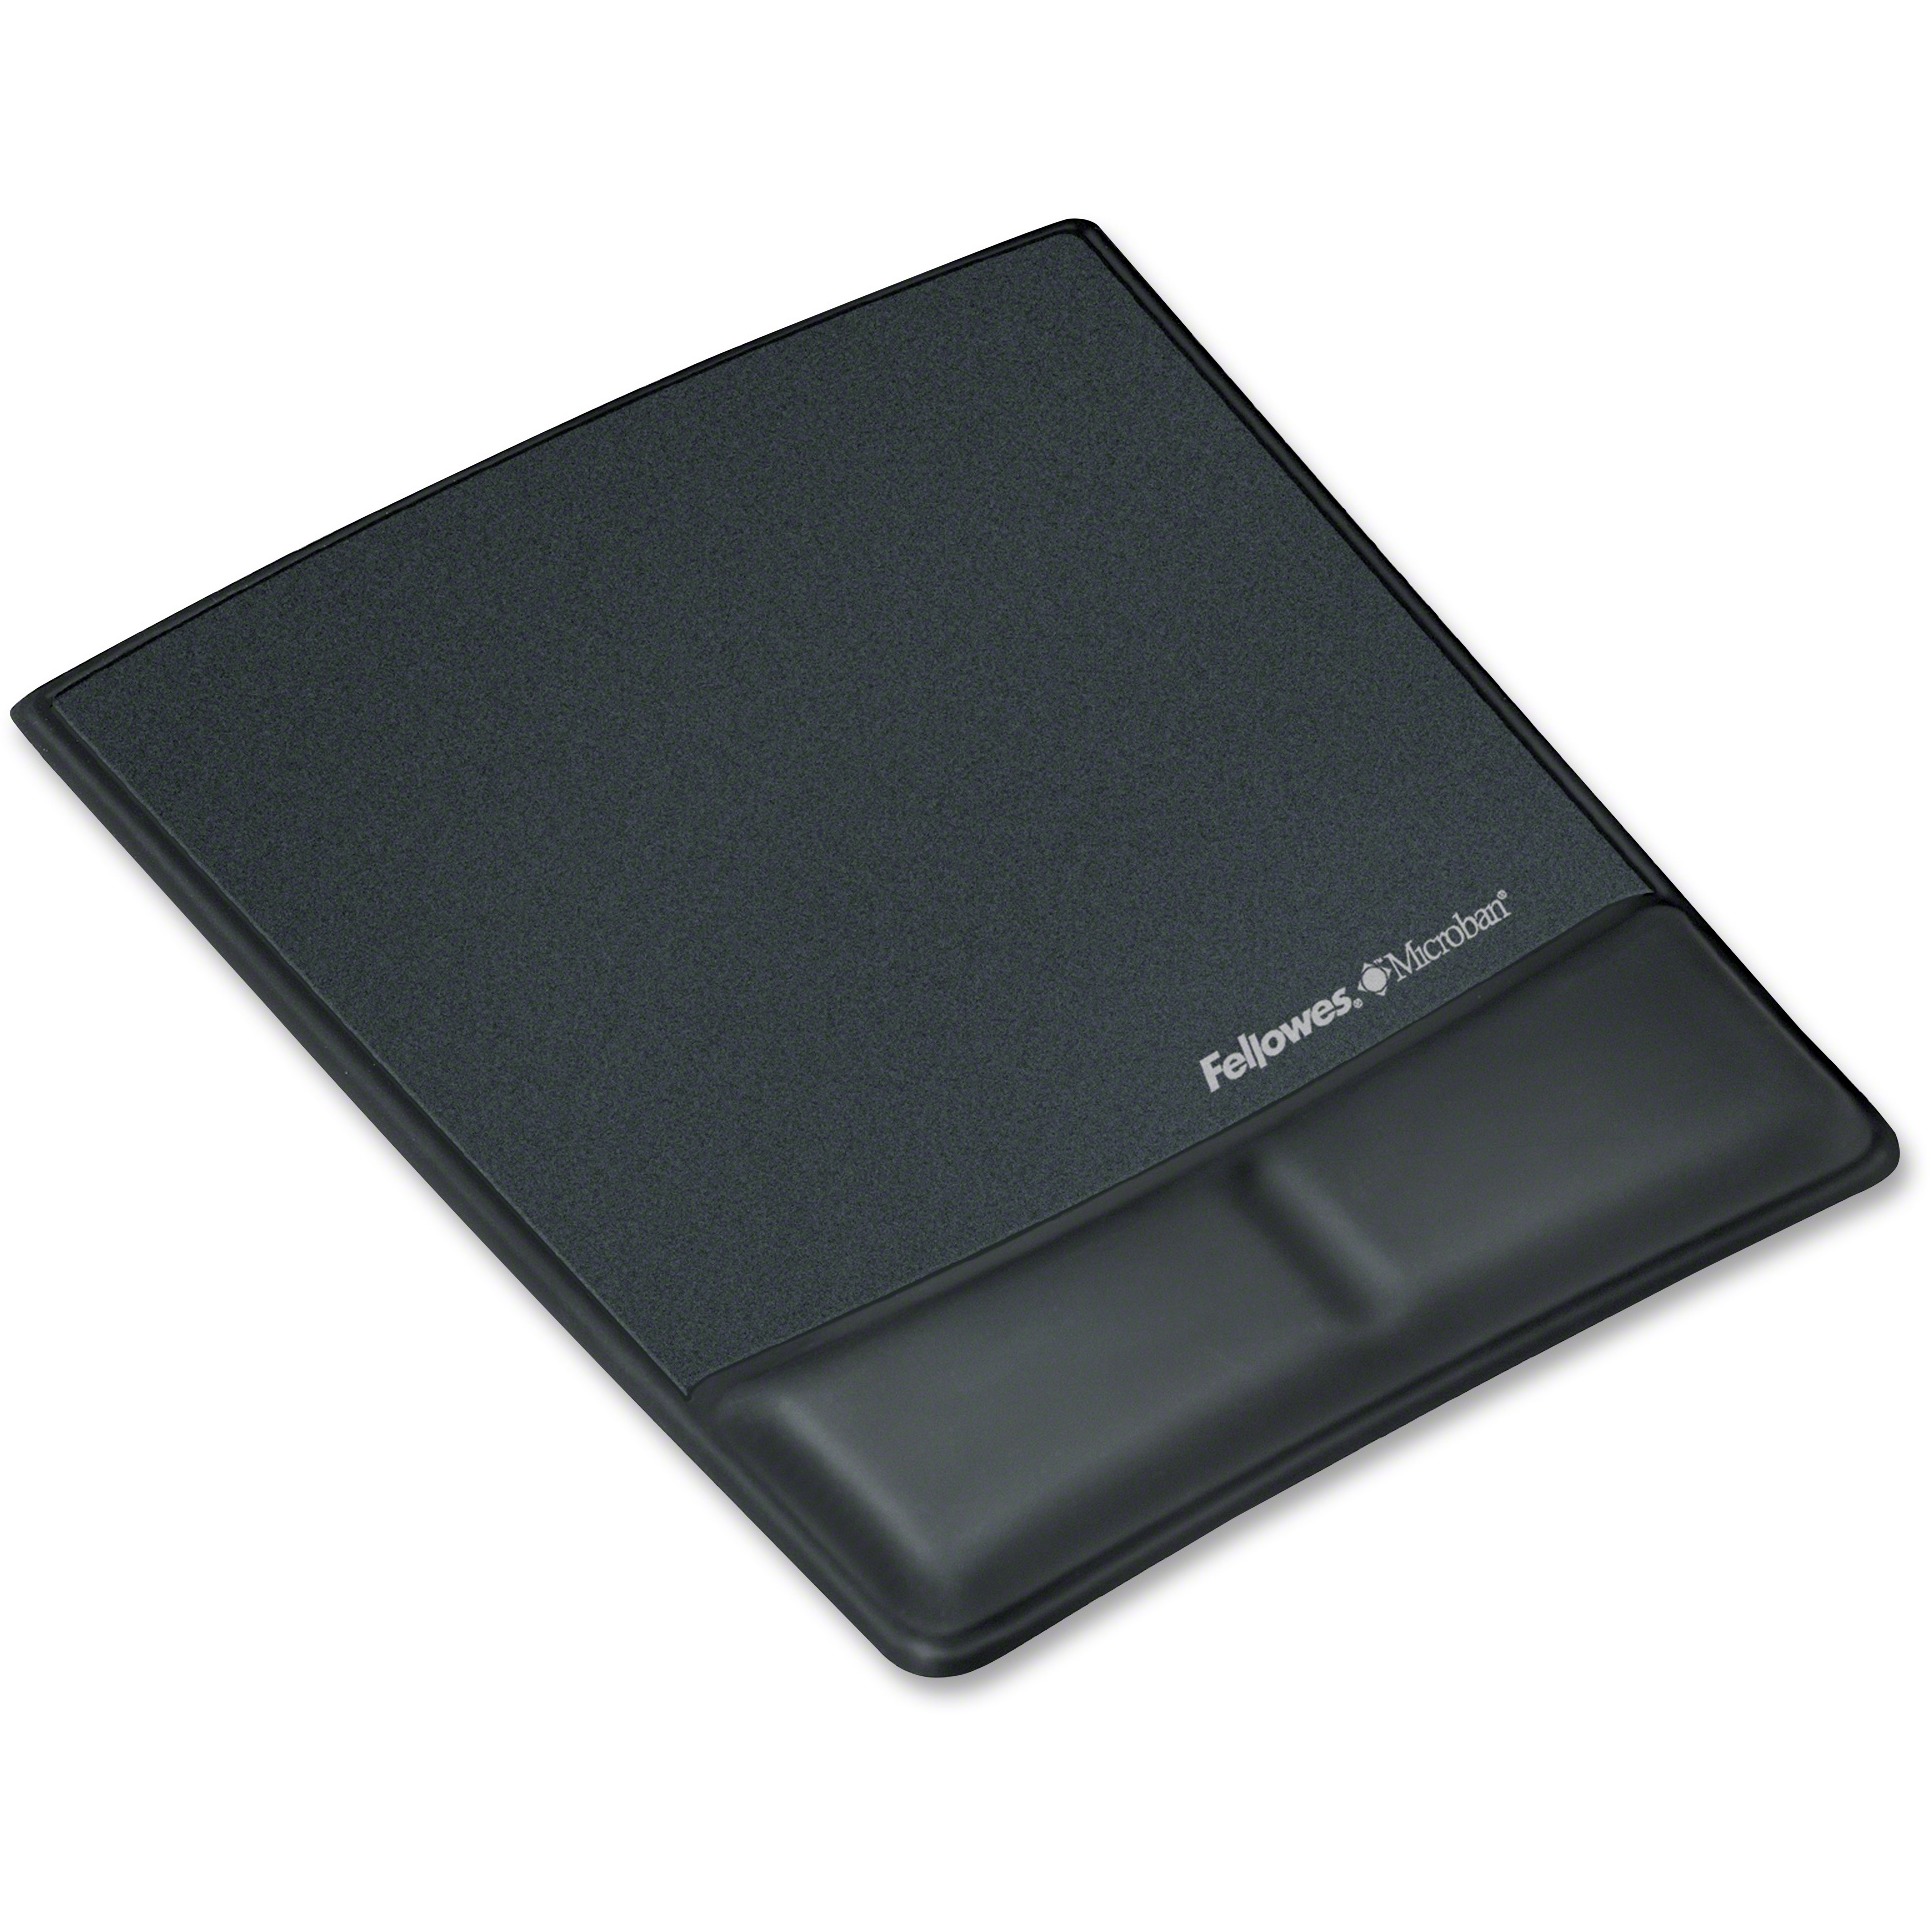 Fellowes Leatherette Mouse Pad/Wrist Support - image 1 of 2